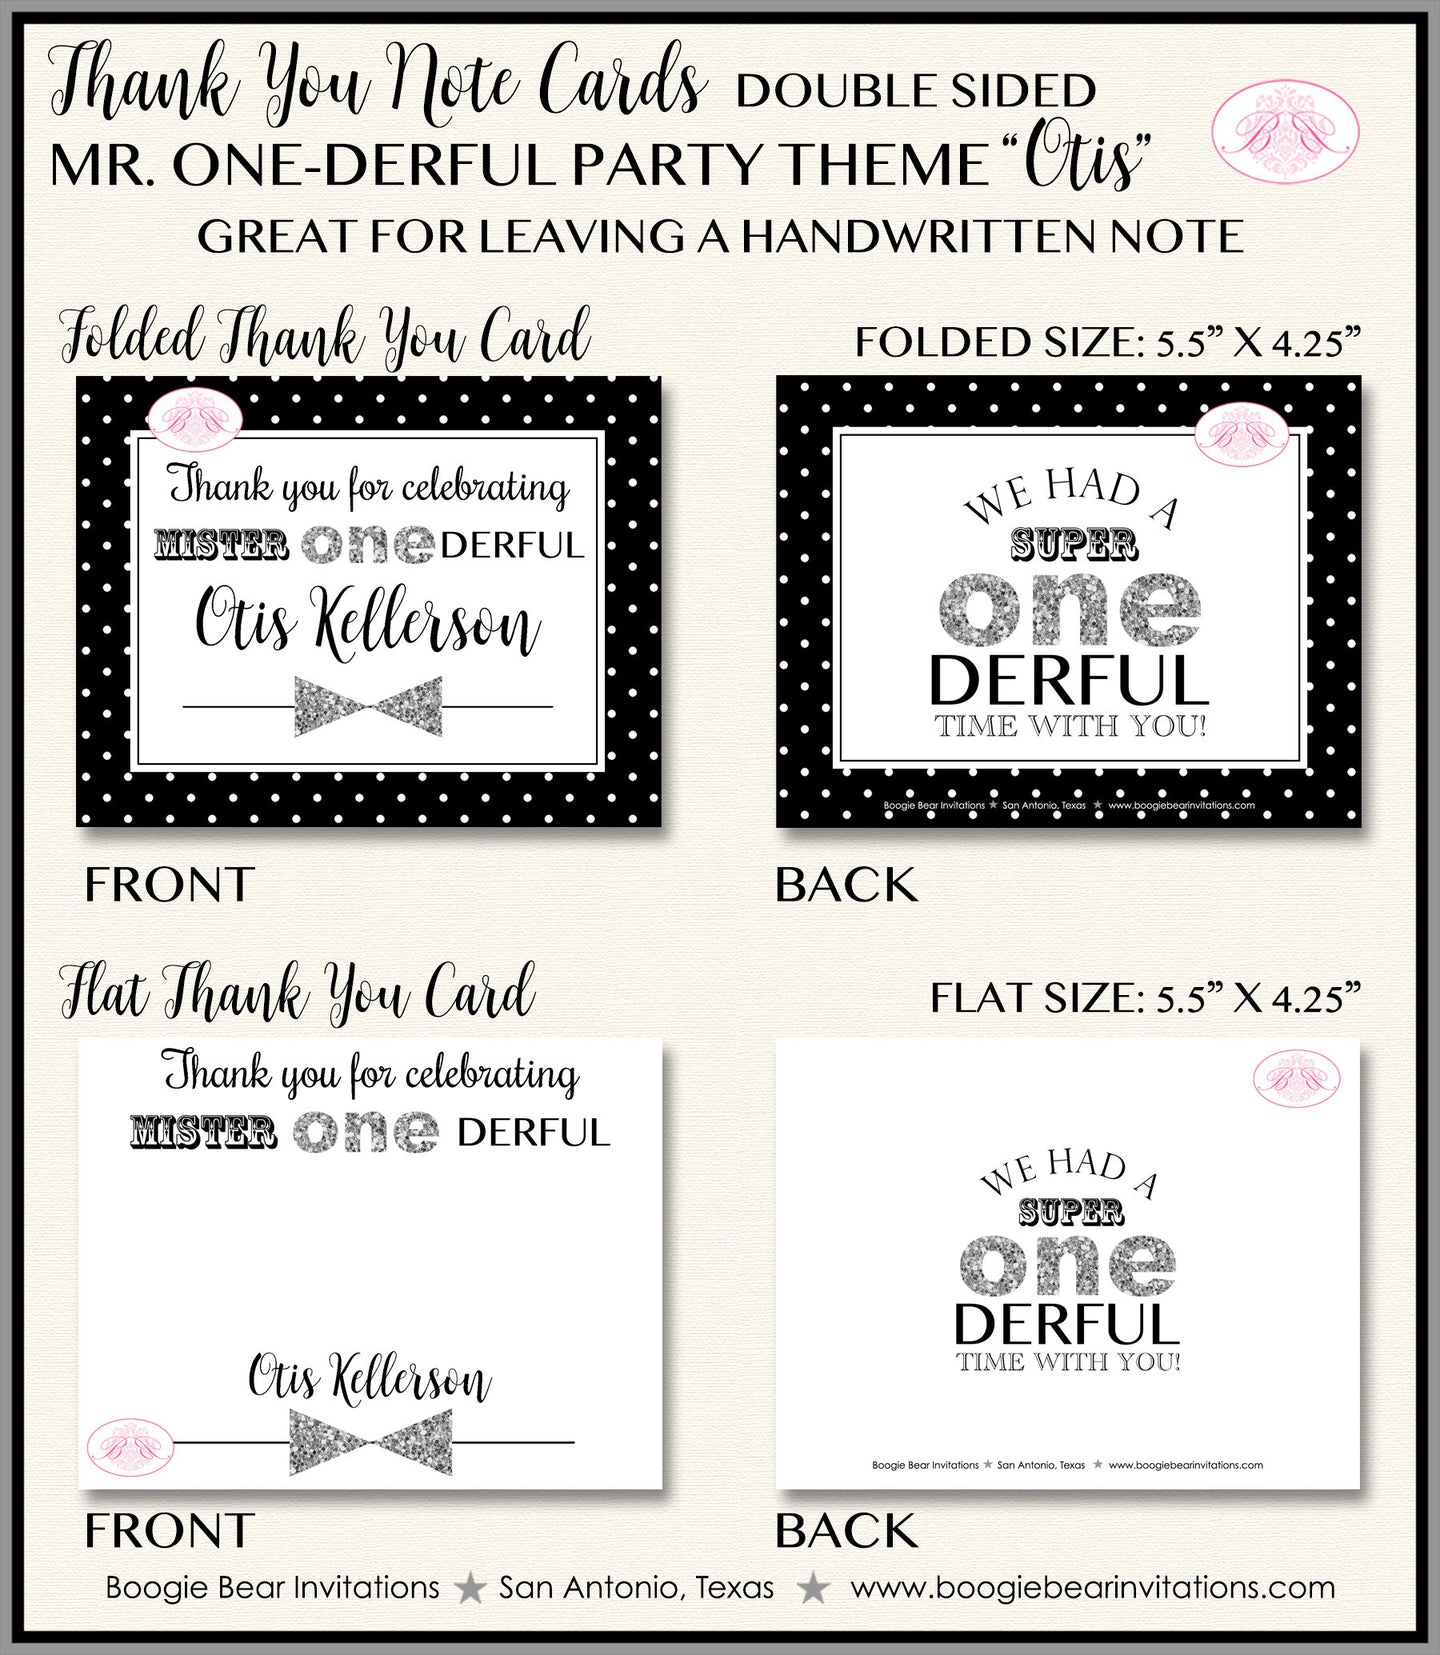 Mr. Wonderful Party Thank You Card Birthday Little Bow Tie Boy Black Silver White Onederful 1st Boogie Bear Invitations Otis Theme Printed